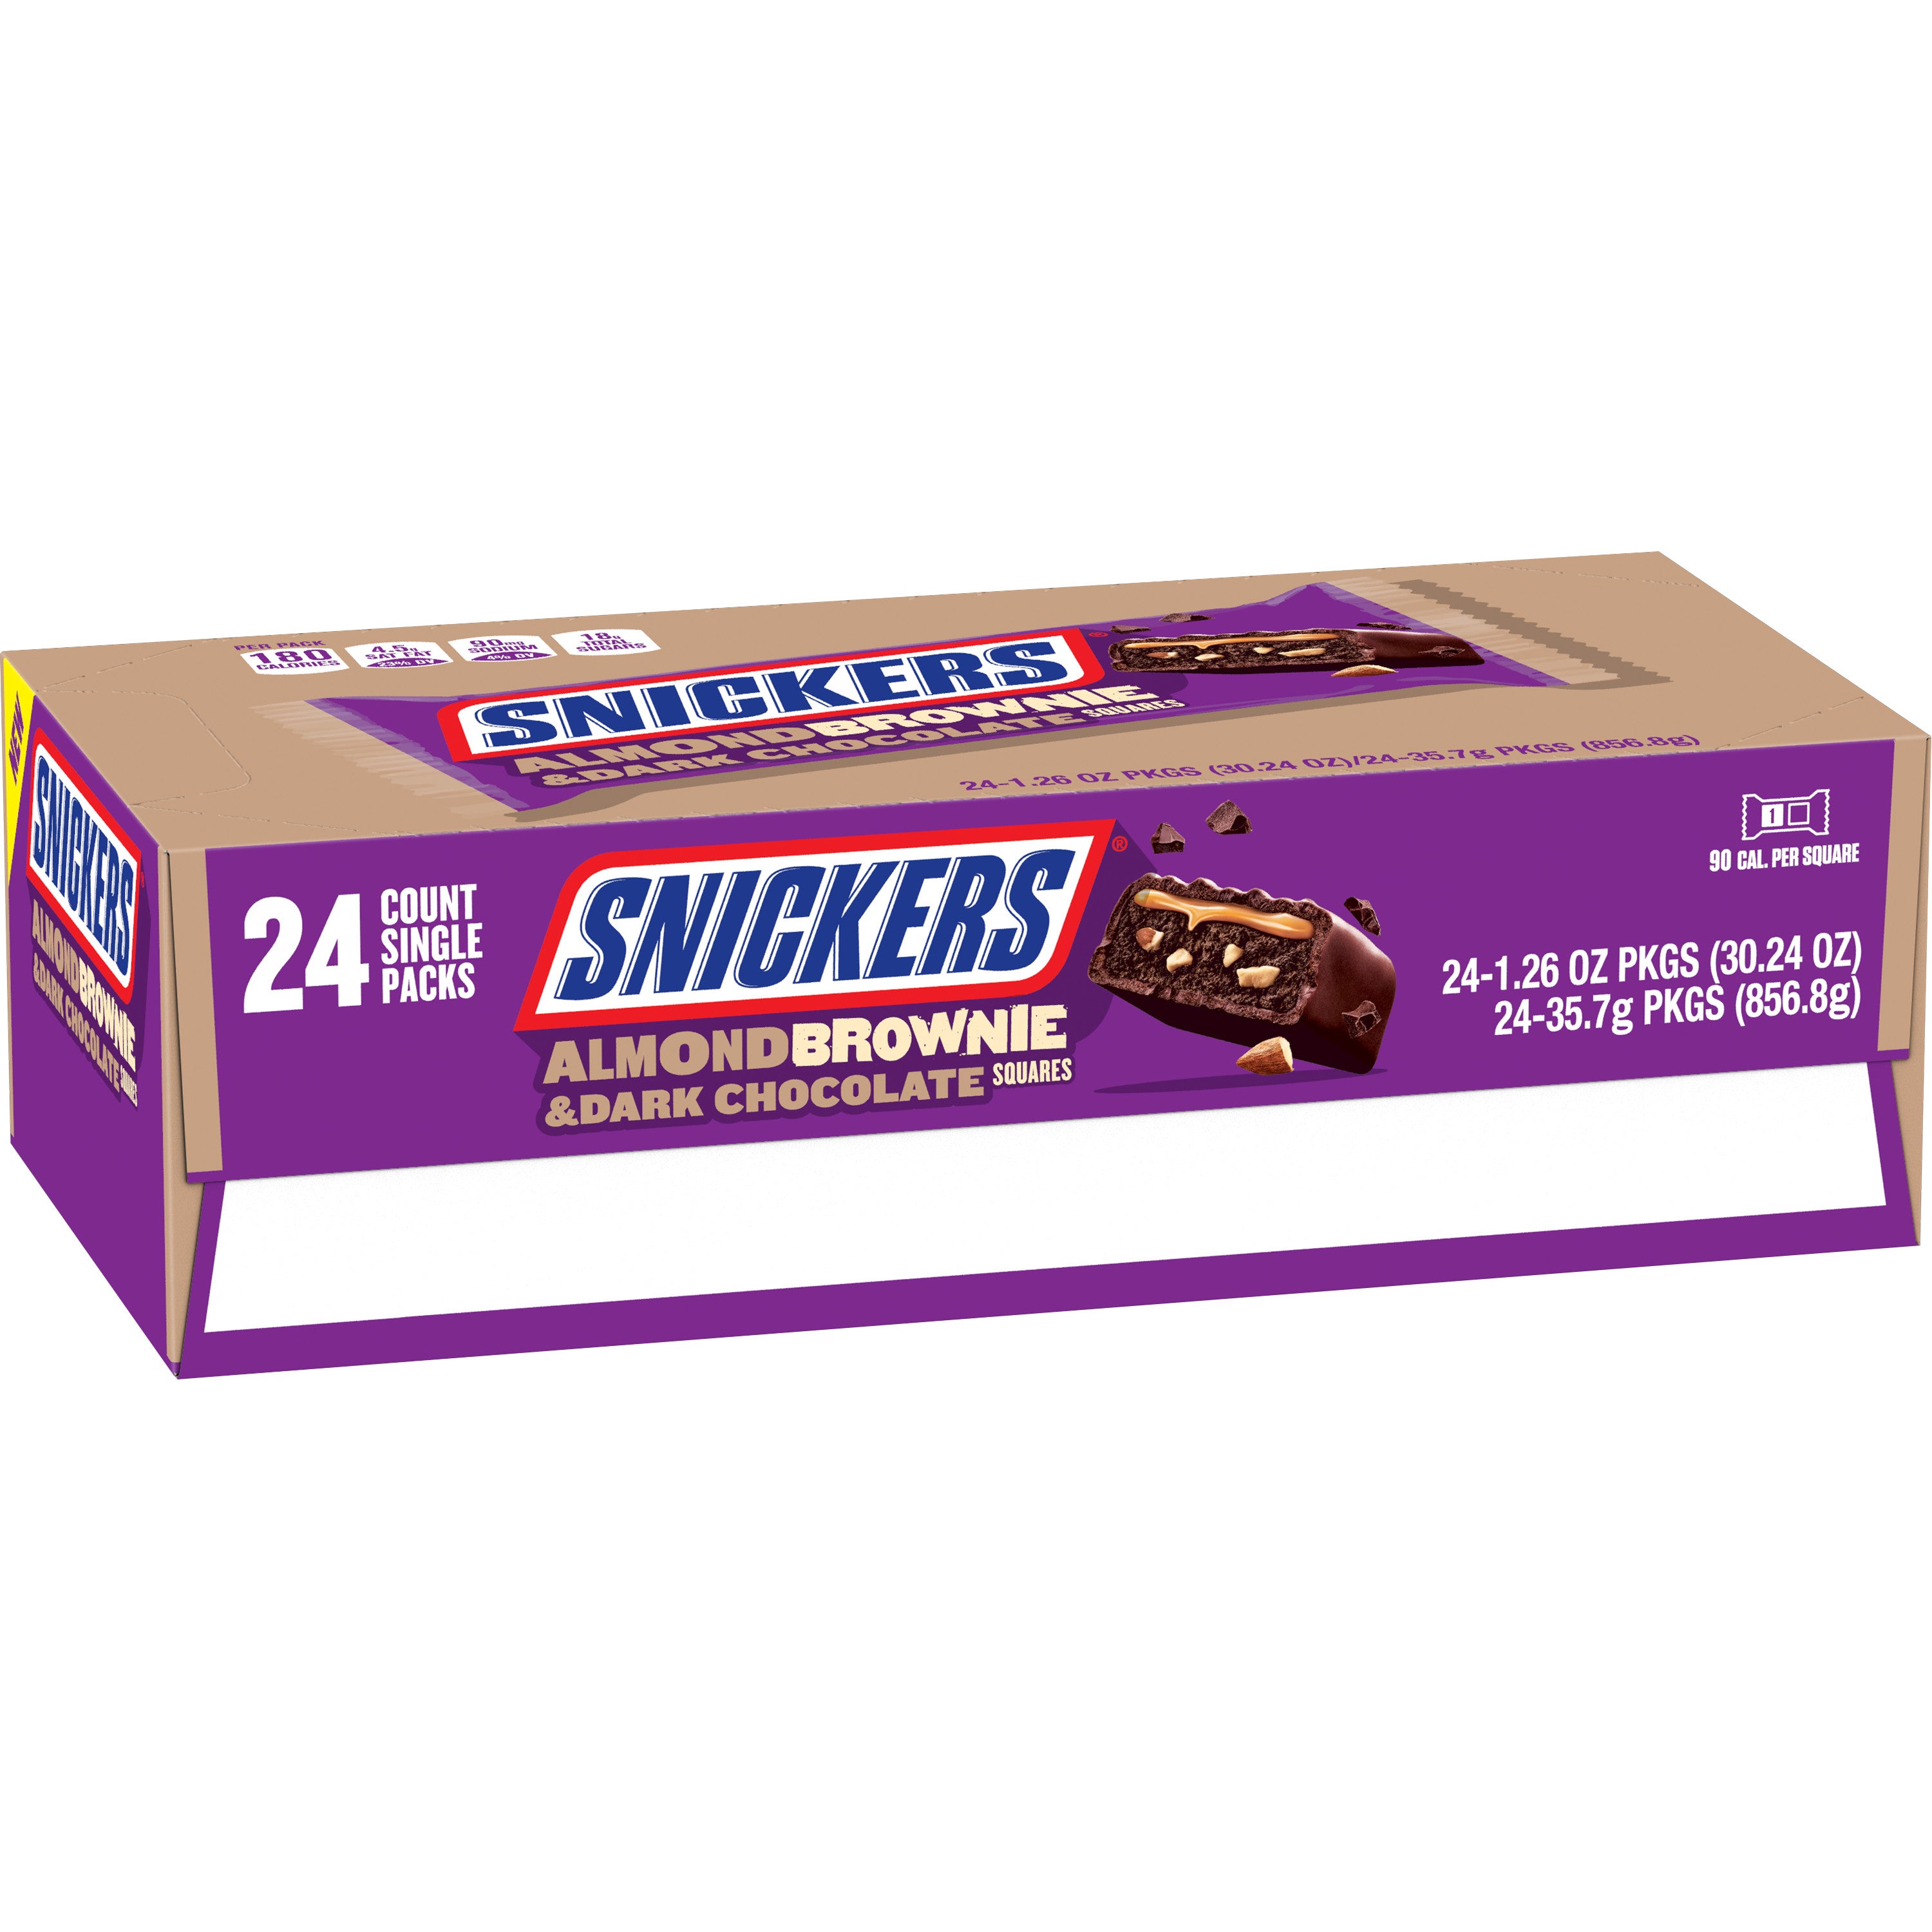 Discount Snickers Almond Brownie & Dark Chocolate | Post dated